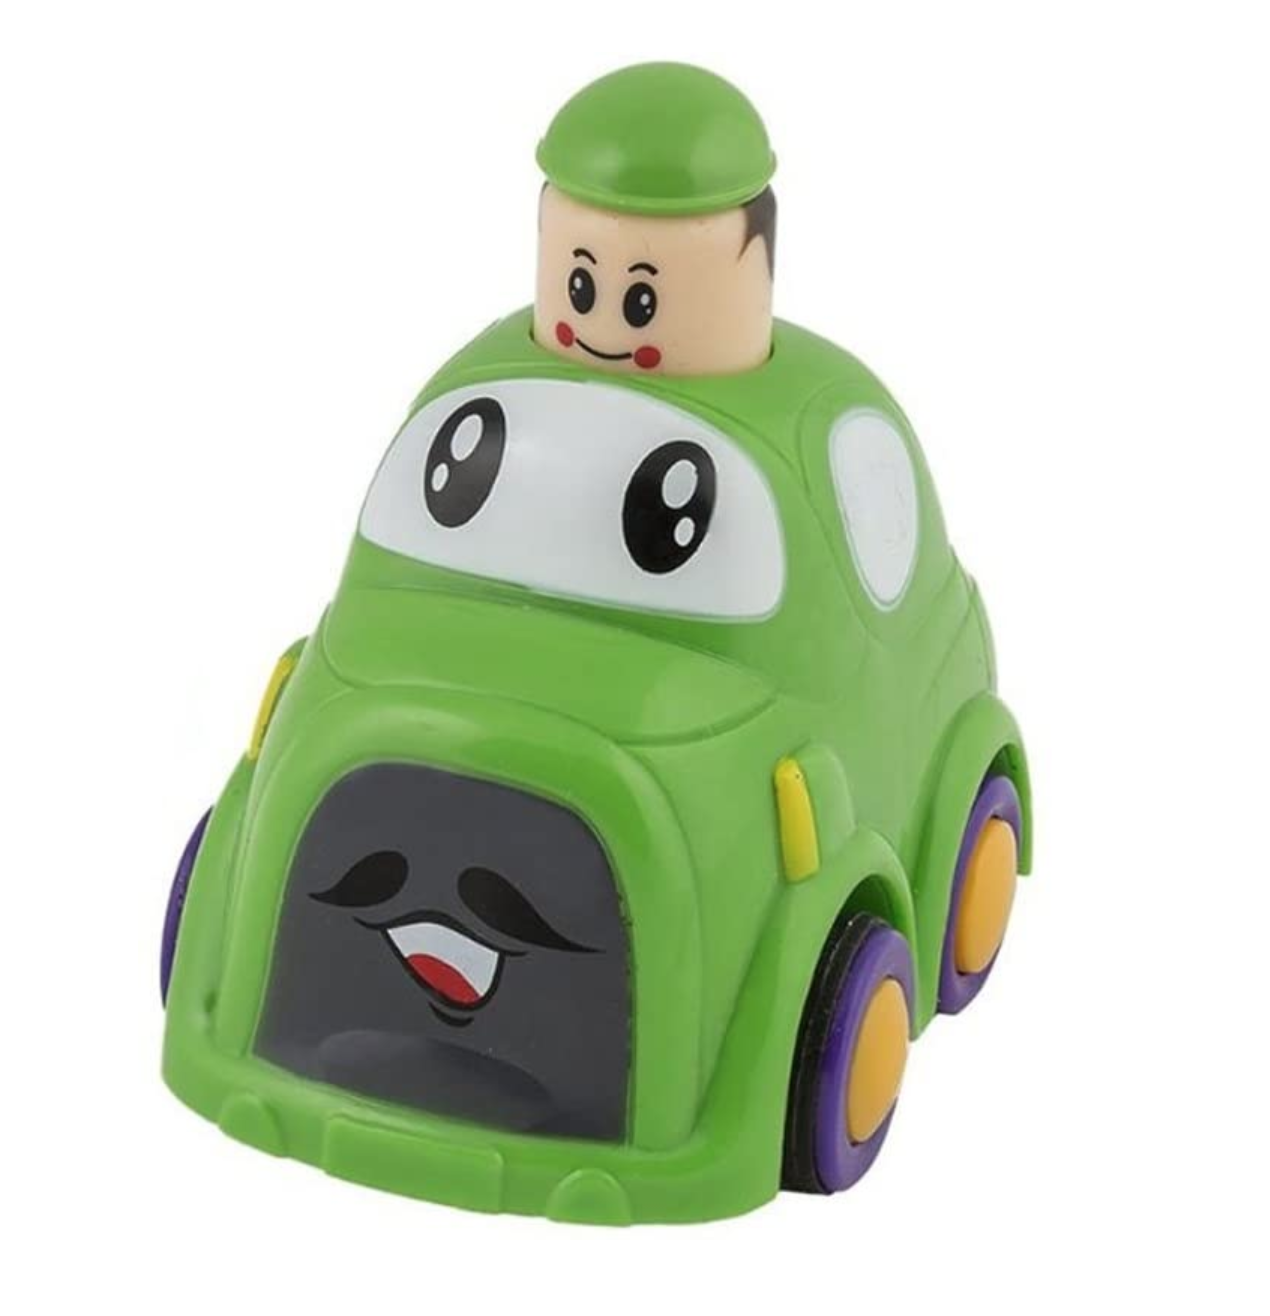 Zoomsters Push & Go Car (sold individually)